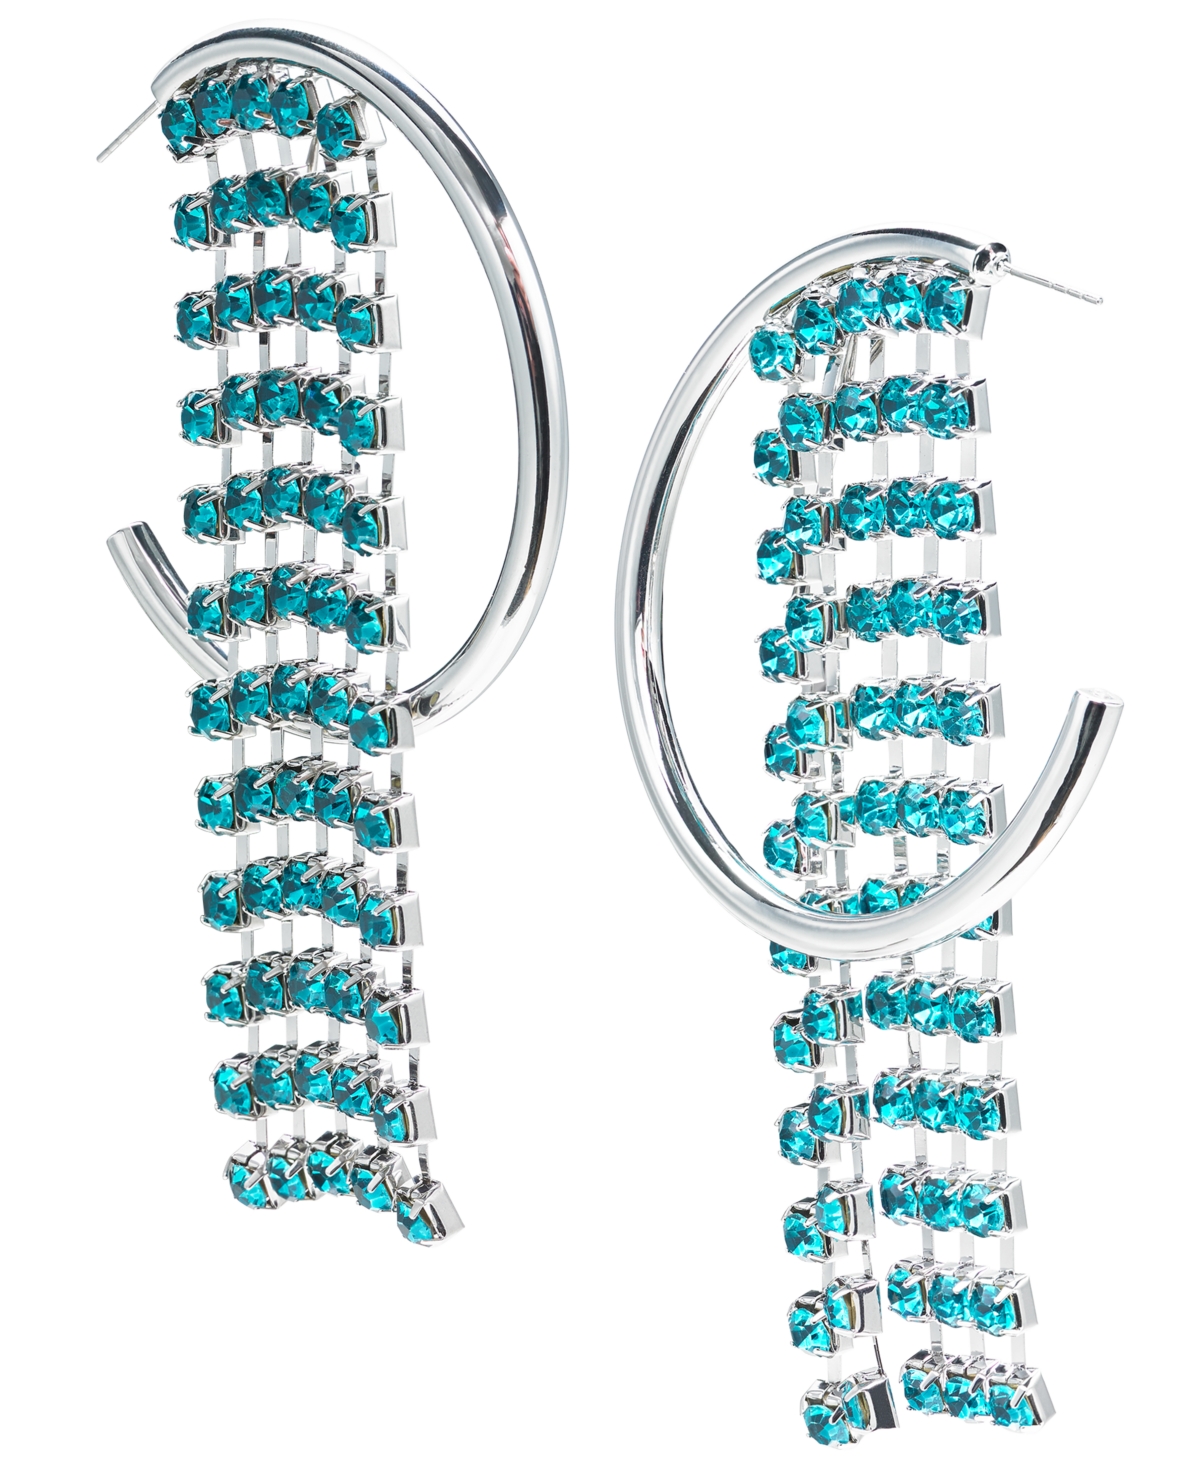 Silver-Tone Color Crystal Fringe C-Hoop Earrings, Created for Macy's - Blue